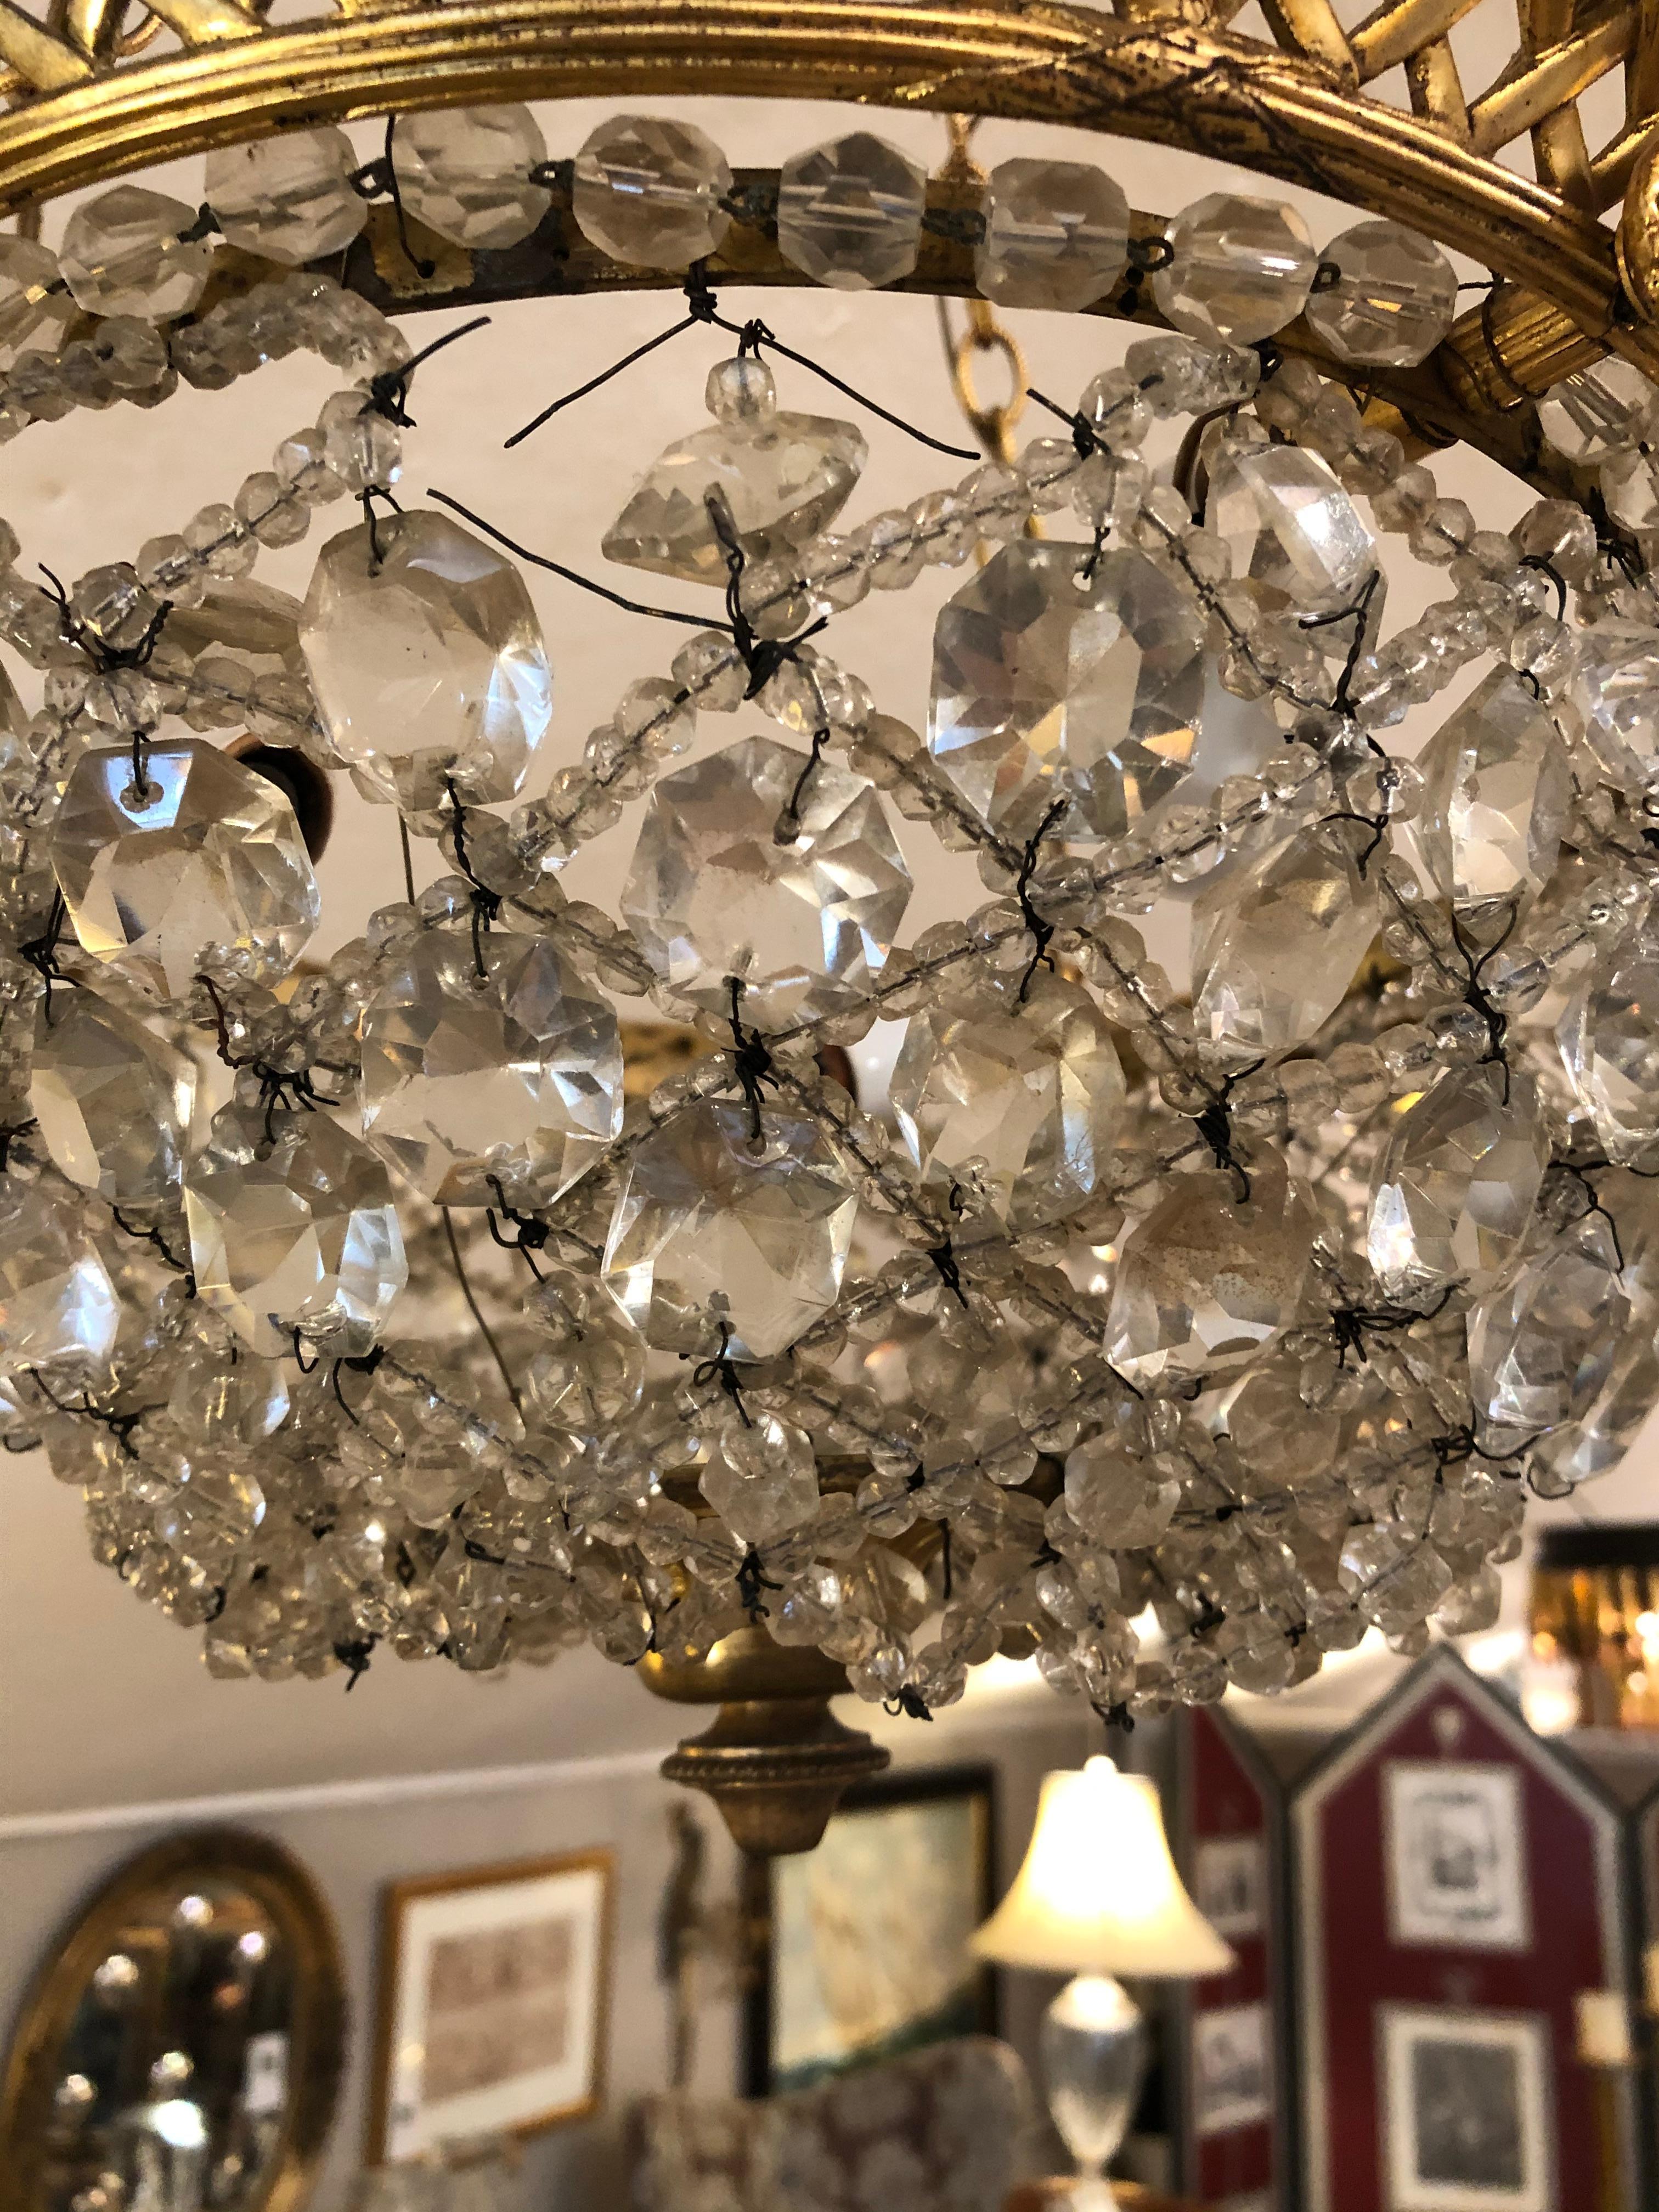 Mid-20th Century Romantic Crystal Encrusted Small Dome-Shaped Chandelier